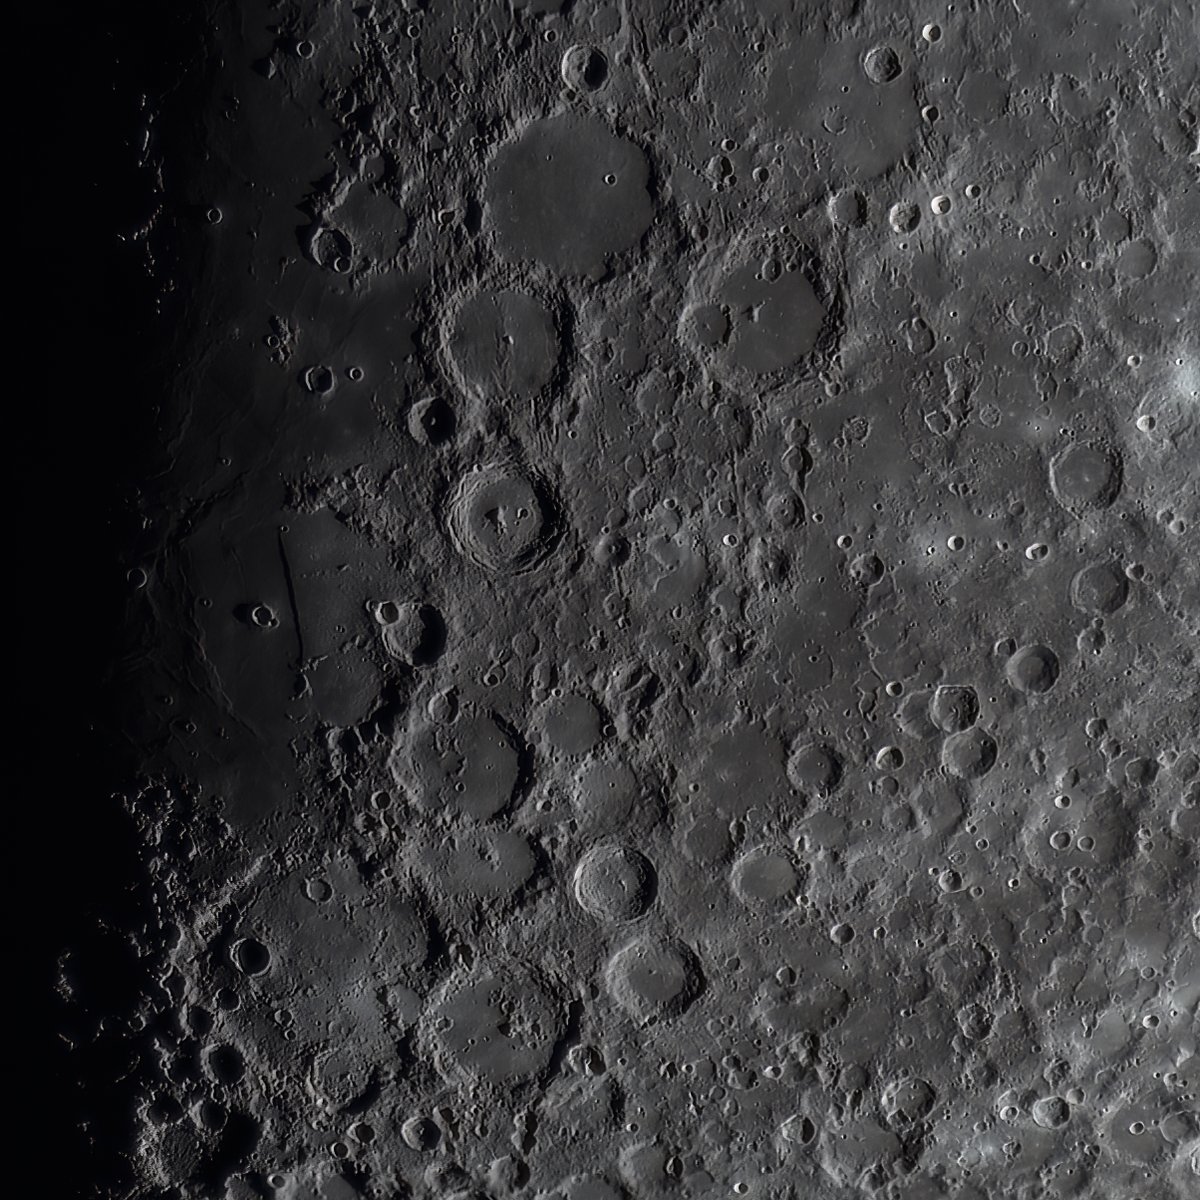 Close ups of the lunar surface with ZWO FF130 APO, x4 PowerMate with P1 Saturn C. @MoonHourSocial #astronomy #astrophotography @ThePhotoHour